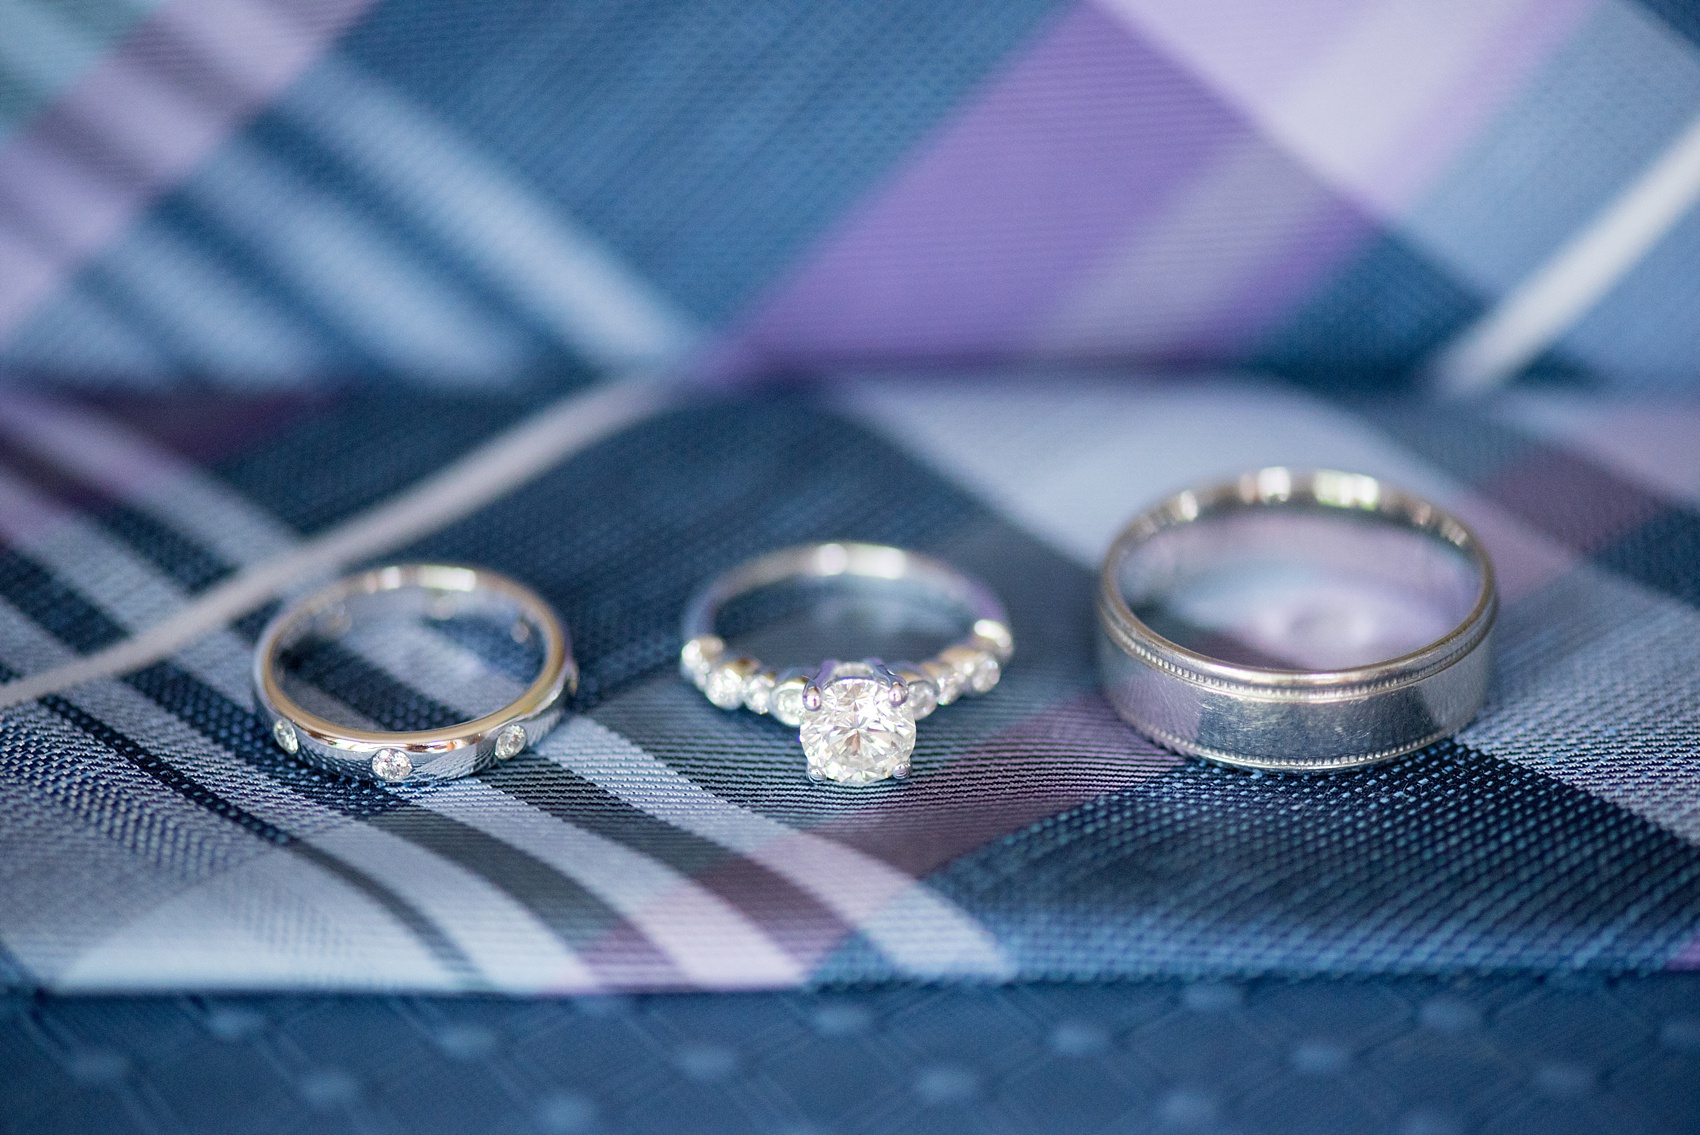 Mikkel Paige Photography photo of an anniversary session with the groom's plaid navy blue, light blue and purple tie and white gold wedding rings.